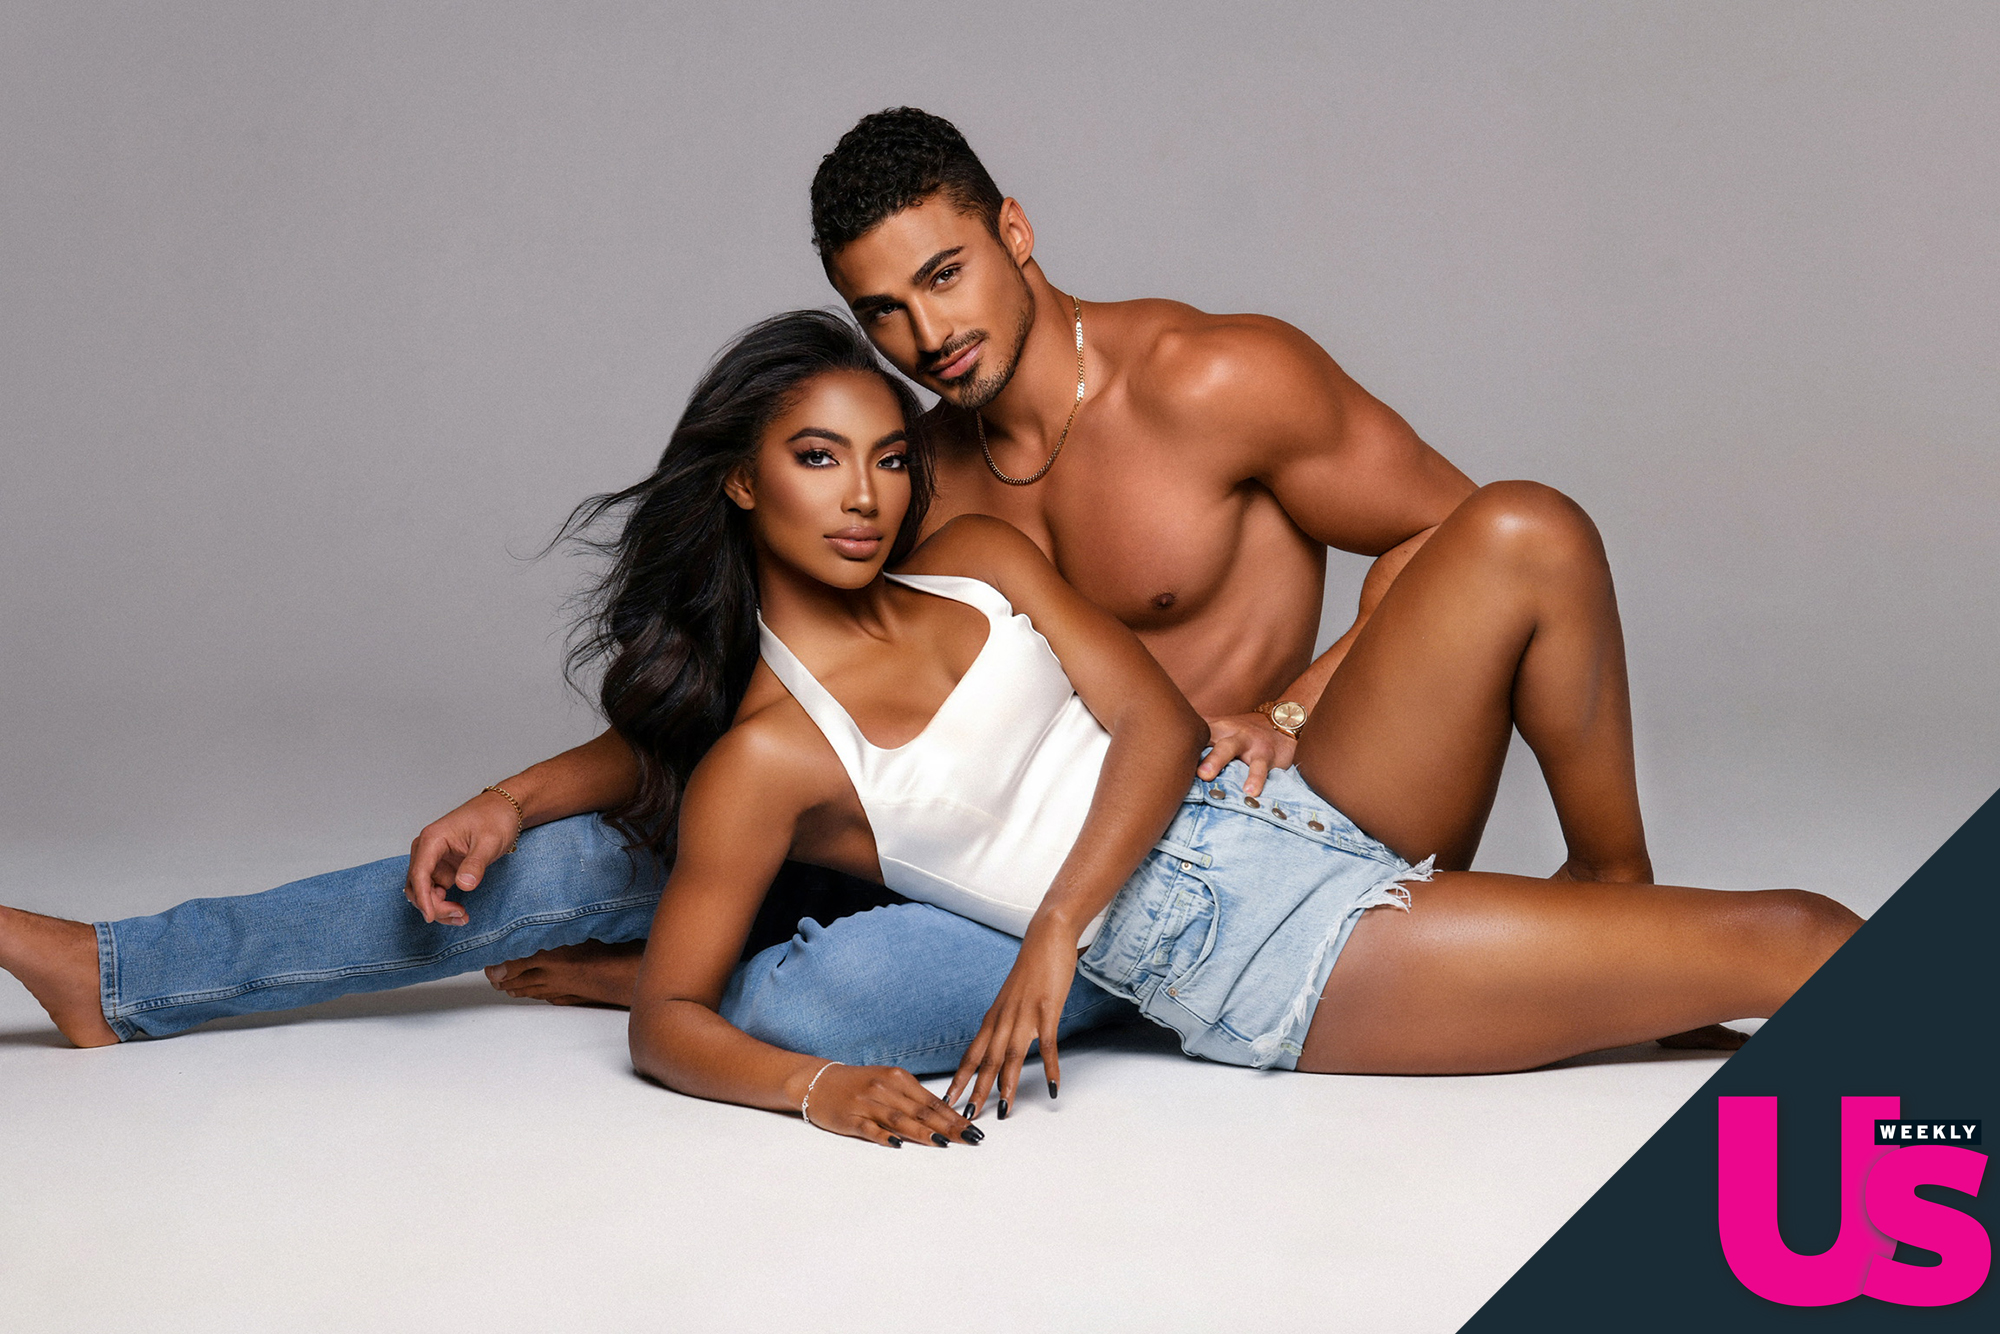 Big Brothers Taylor and Joseph Pose for Sexy Anniversary Photos